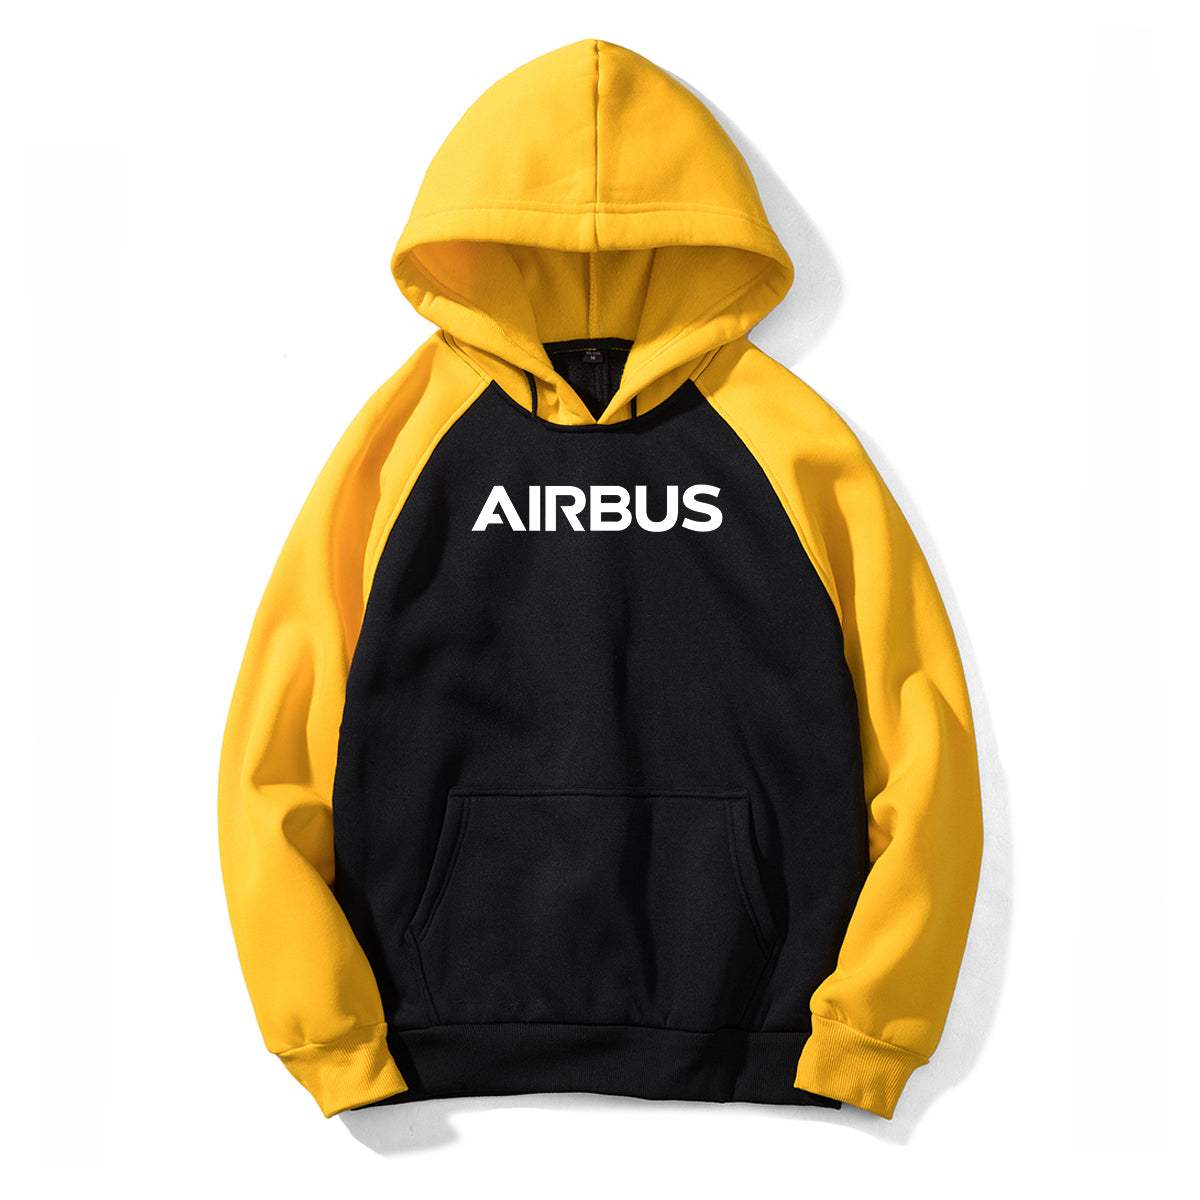 Airbus & Text Designed Colourful Hoodies